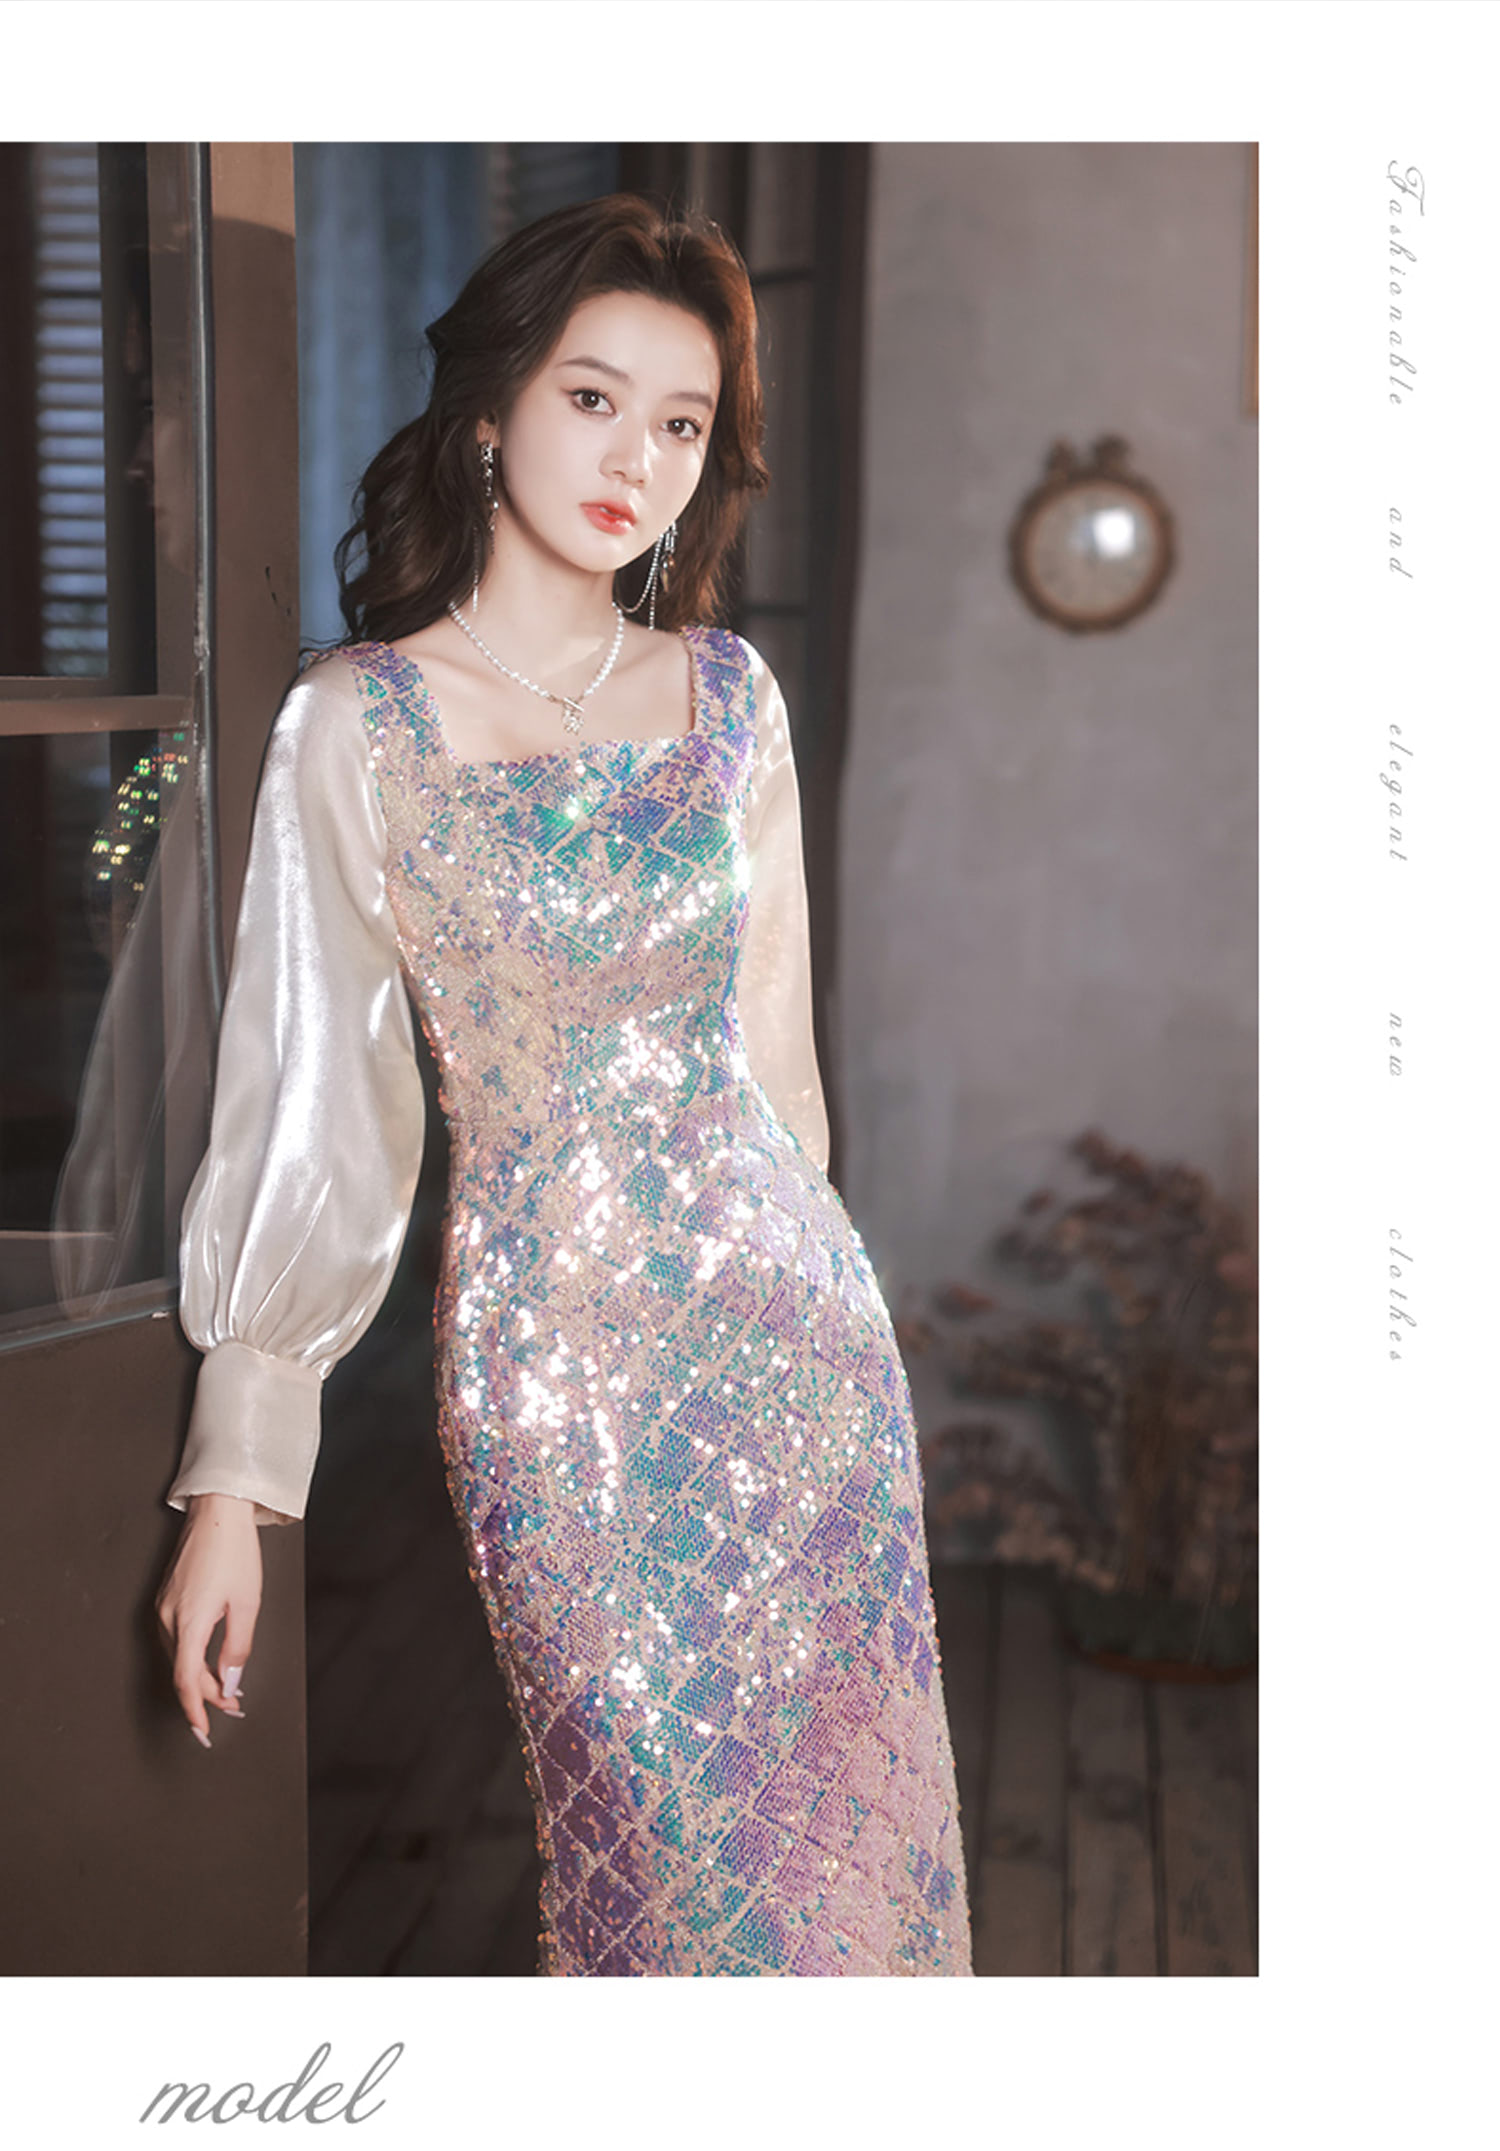 Luxury-Sparkly-Square-Neck-Long-Sleeve-Banquet-Party-Fishtail-Dress16